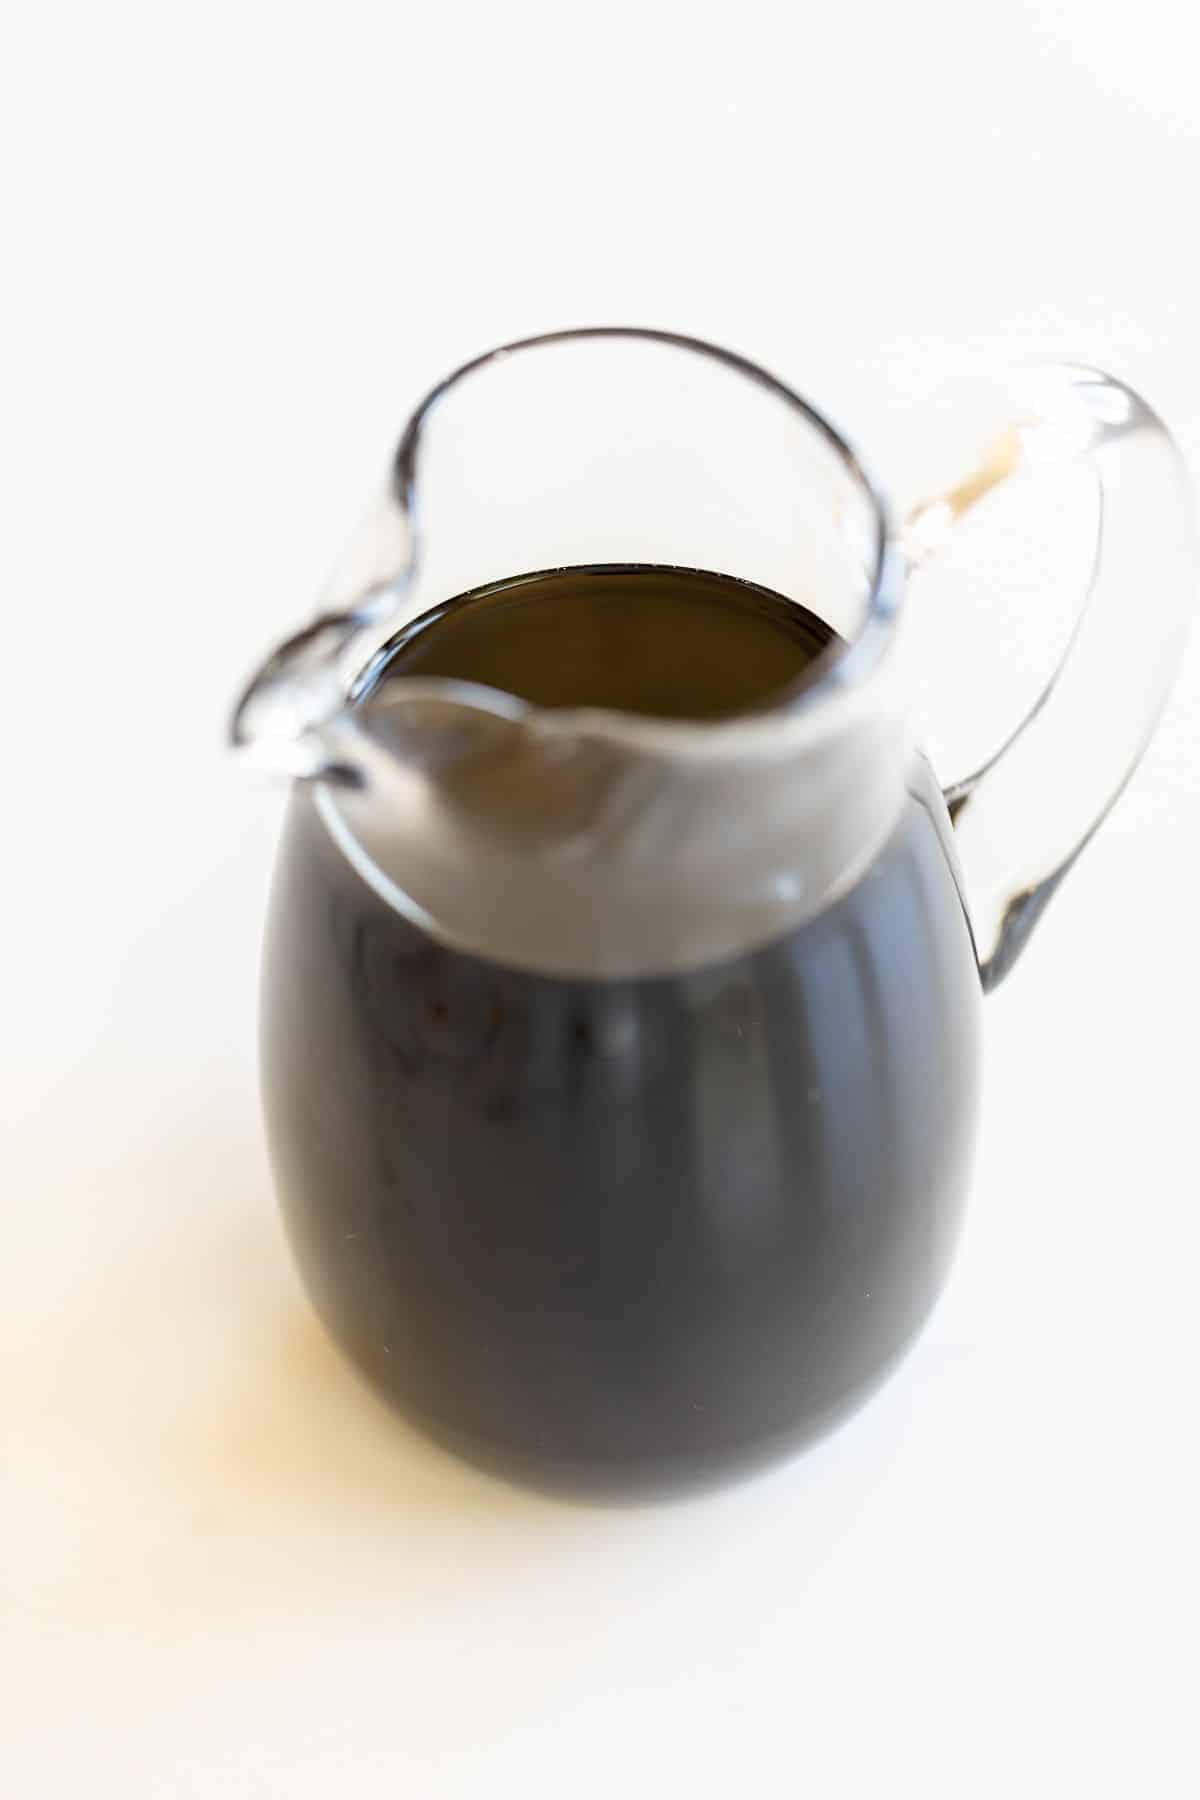 A clear pitcher full of balsamic glaze, on a white surface.